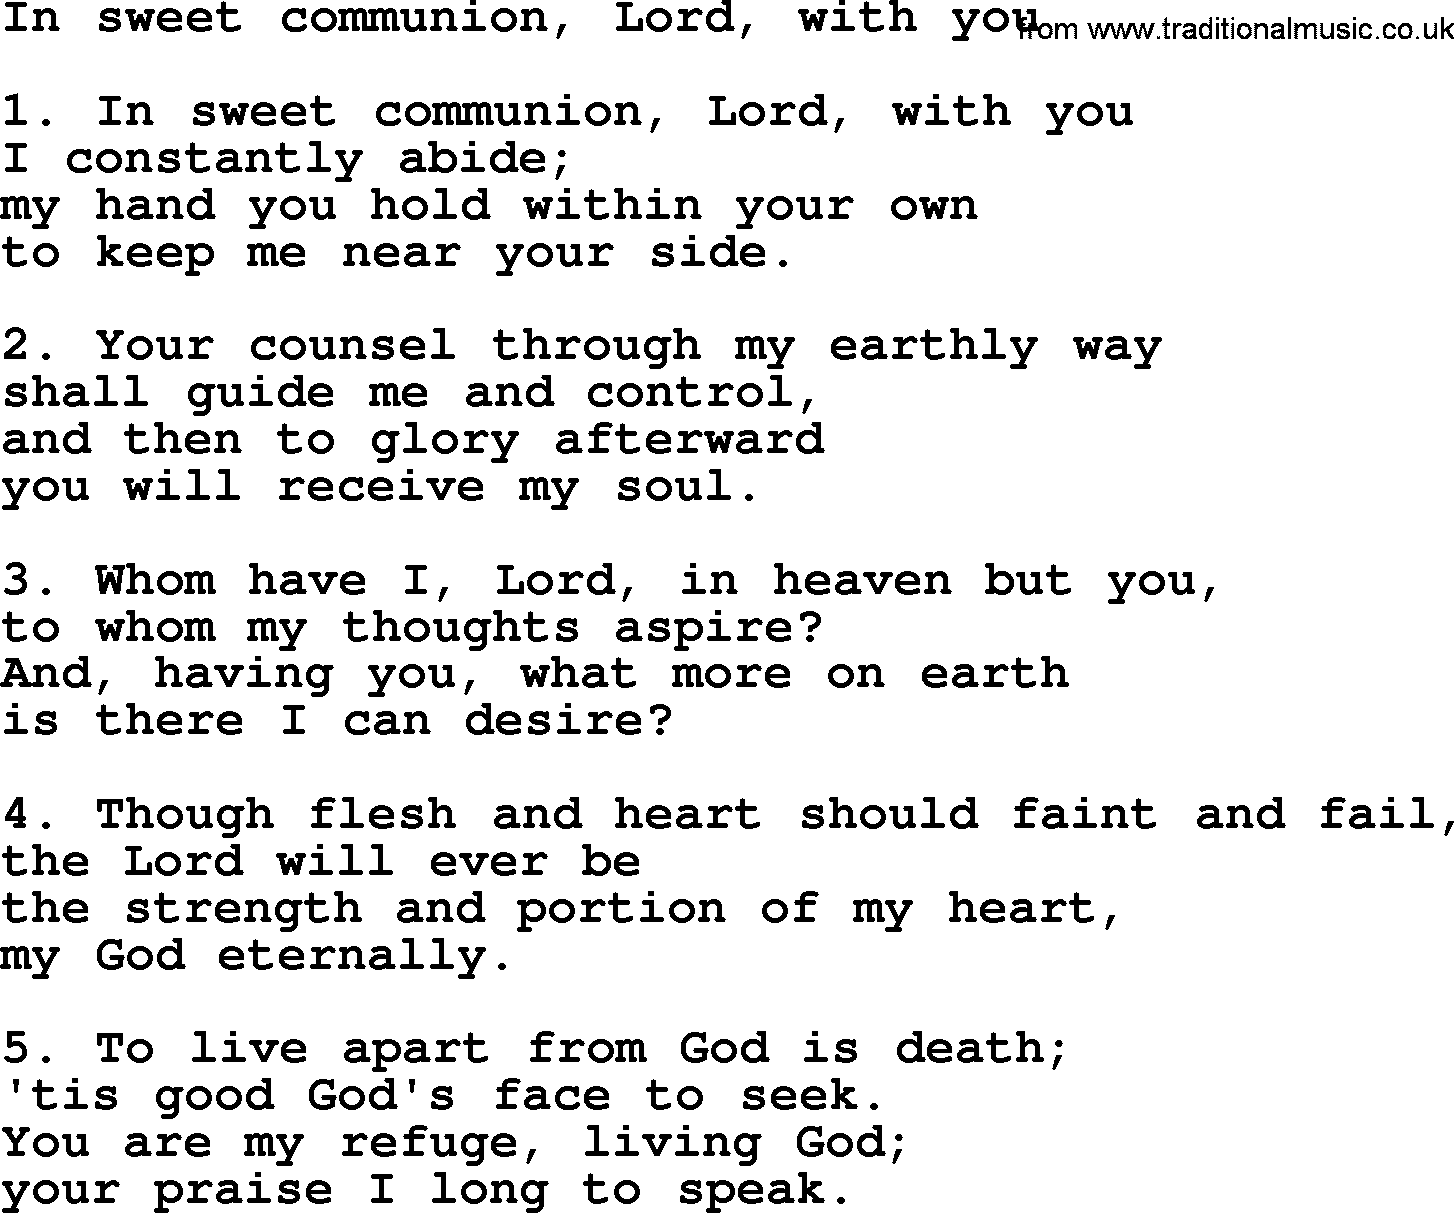 Presbyterian Hymns collection, Hymn: In Sweet Communion, Lord, With You, lyrics and PDF